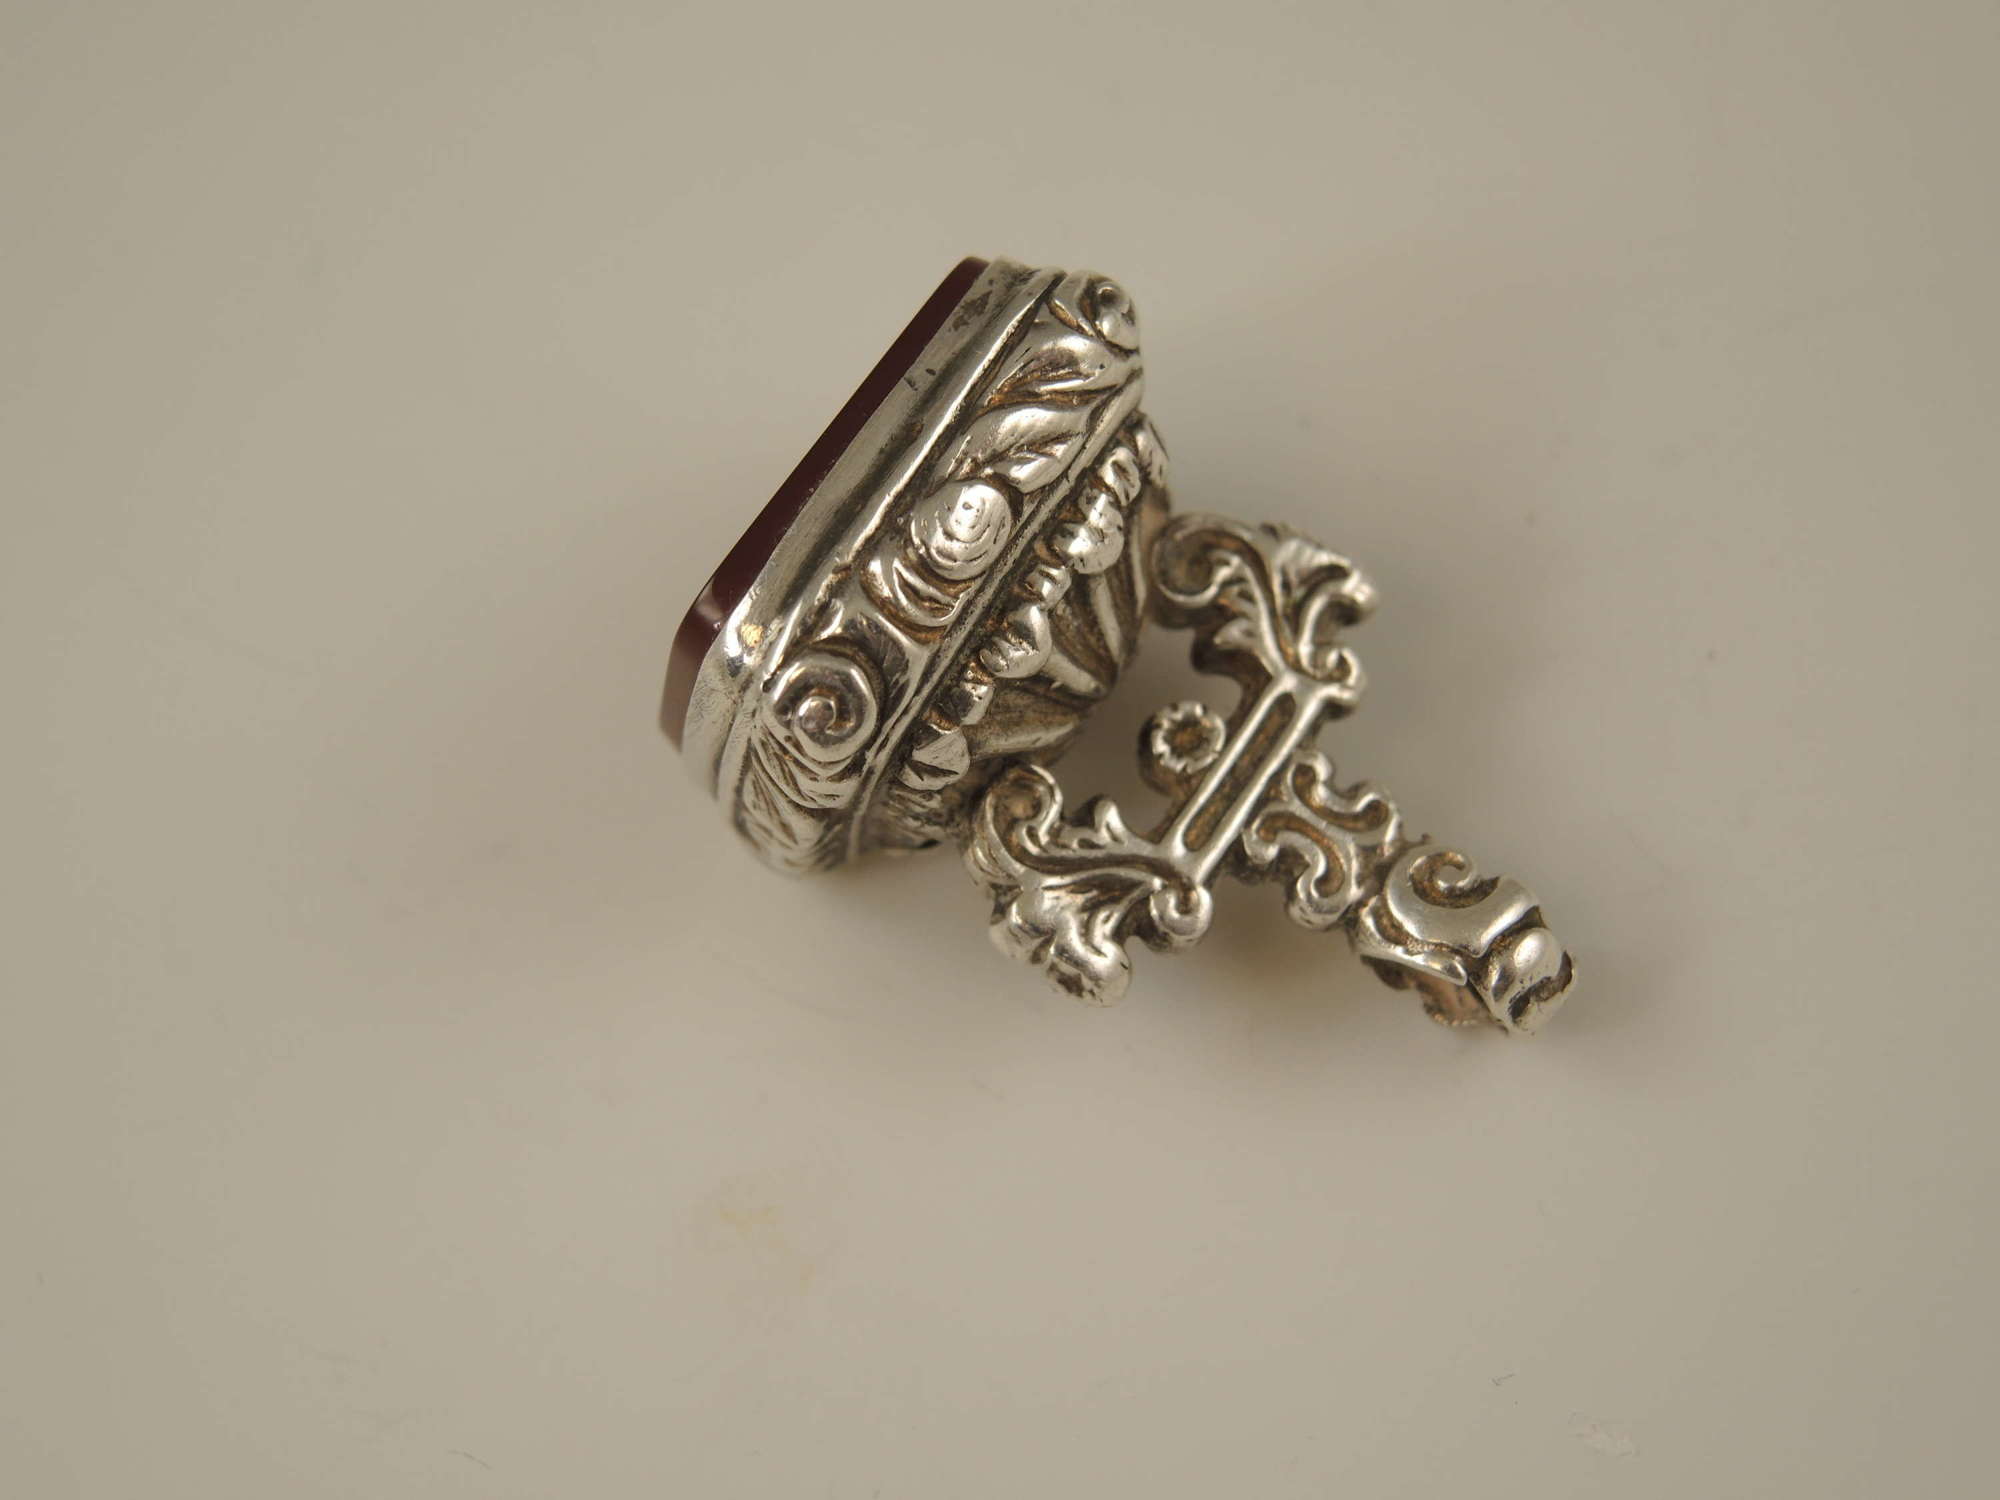 Vintage silver and stone set seal.